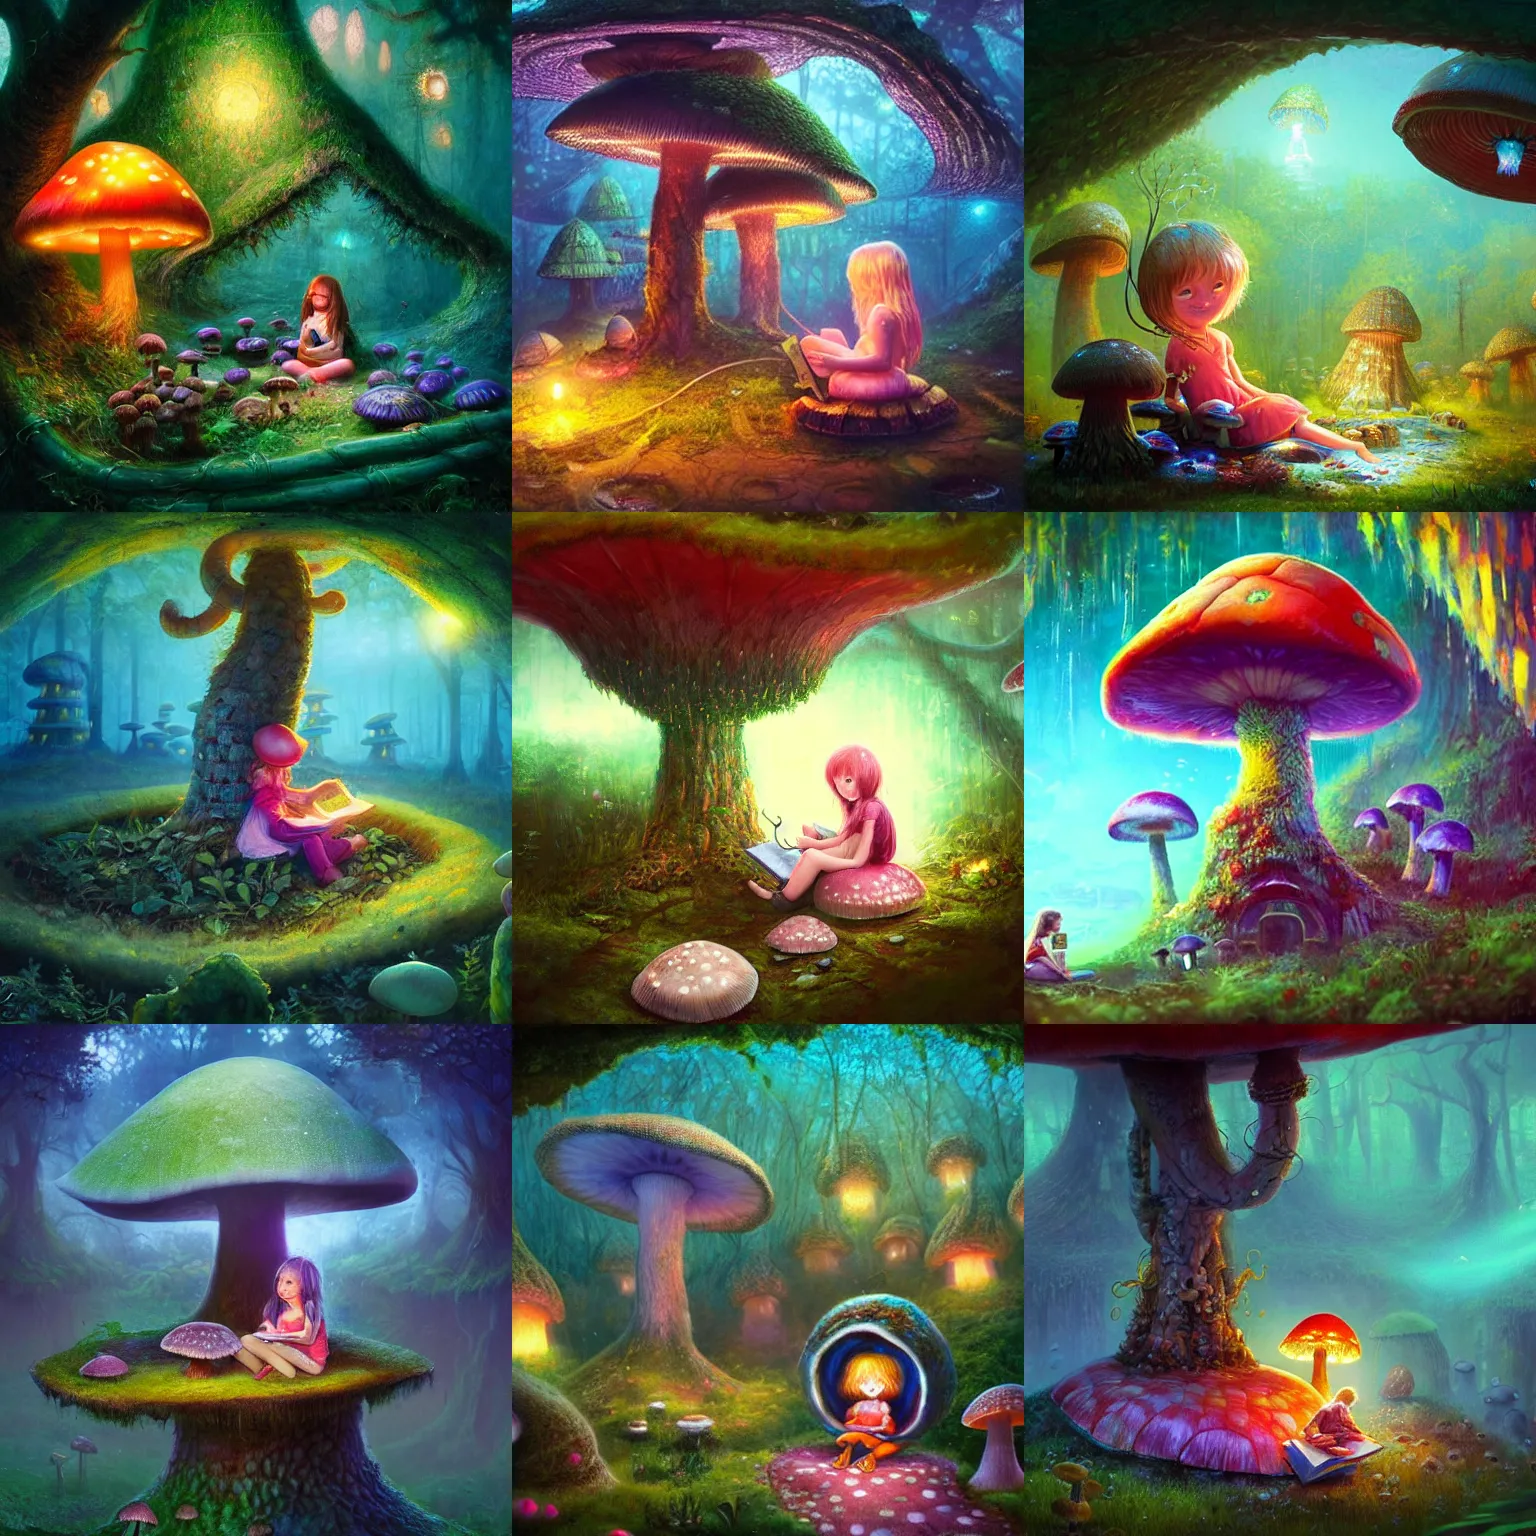 Prompt: ”cute young girl sitting by a mushroom reading a book, giant mushroom houses in a mysterious fantasy forest, [bioluminescense, rope bridges, art by wlop and paul lehr, cinematic, colorful]”